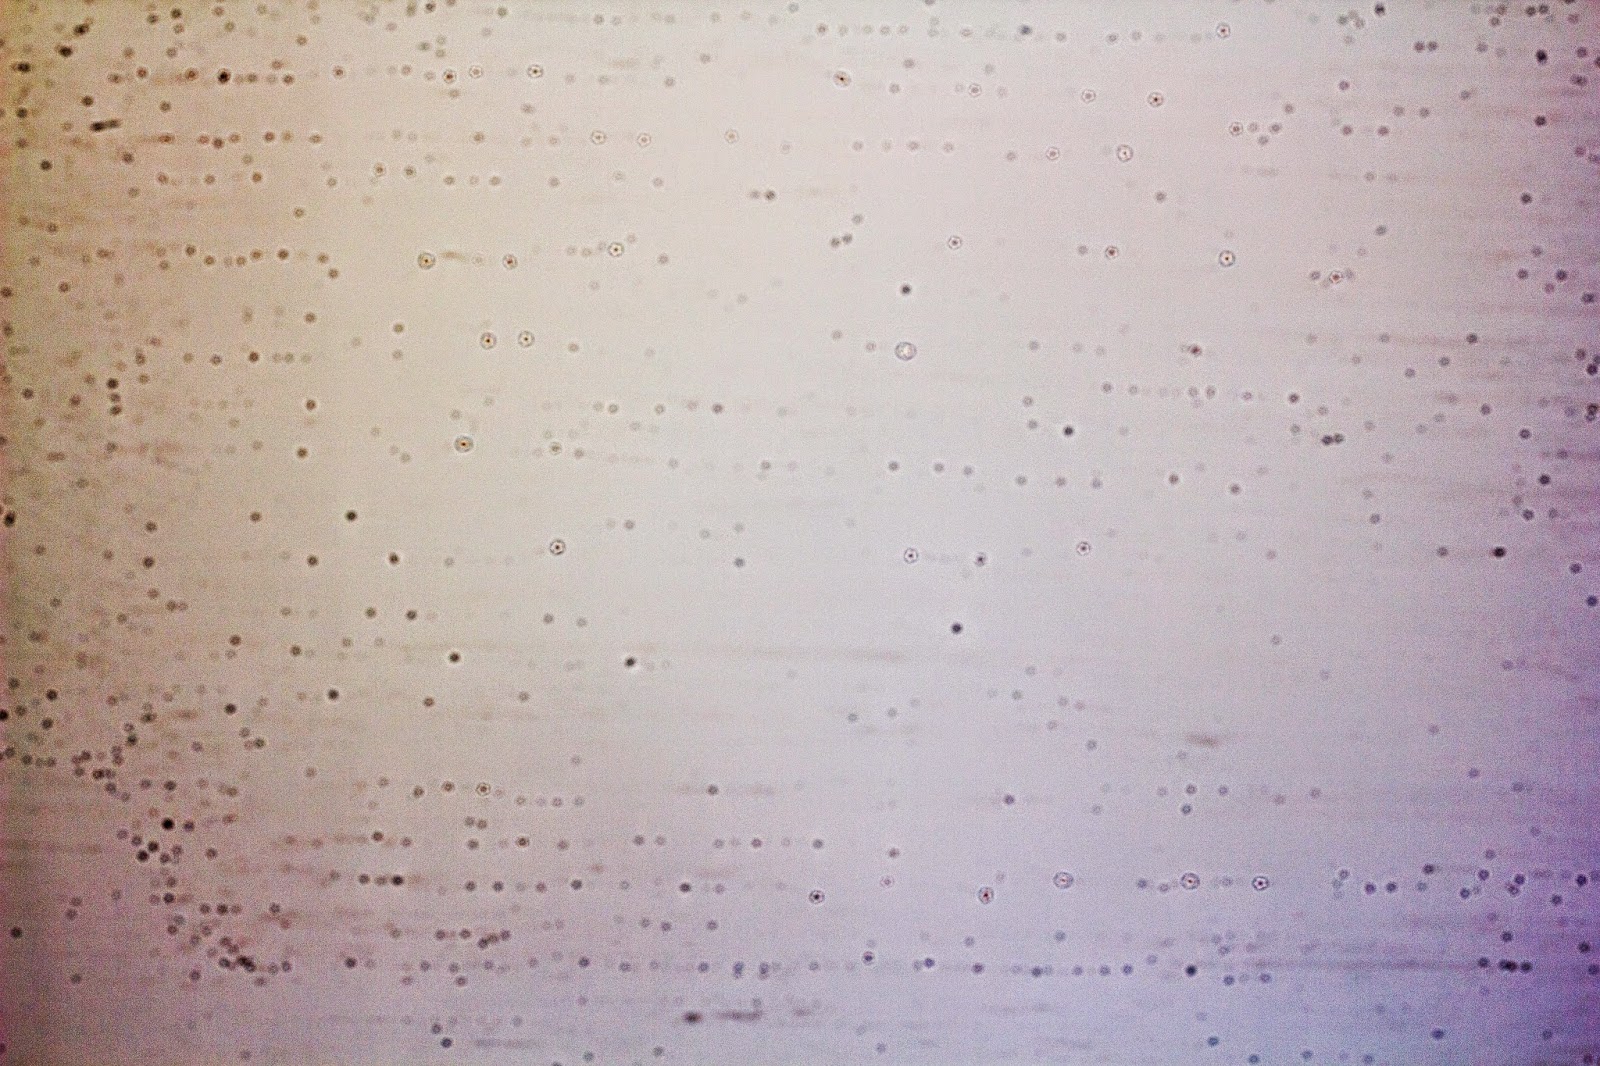 Test image with visible sensor dust and traces of sensor cleaning liquid